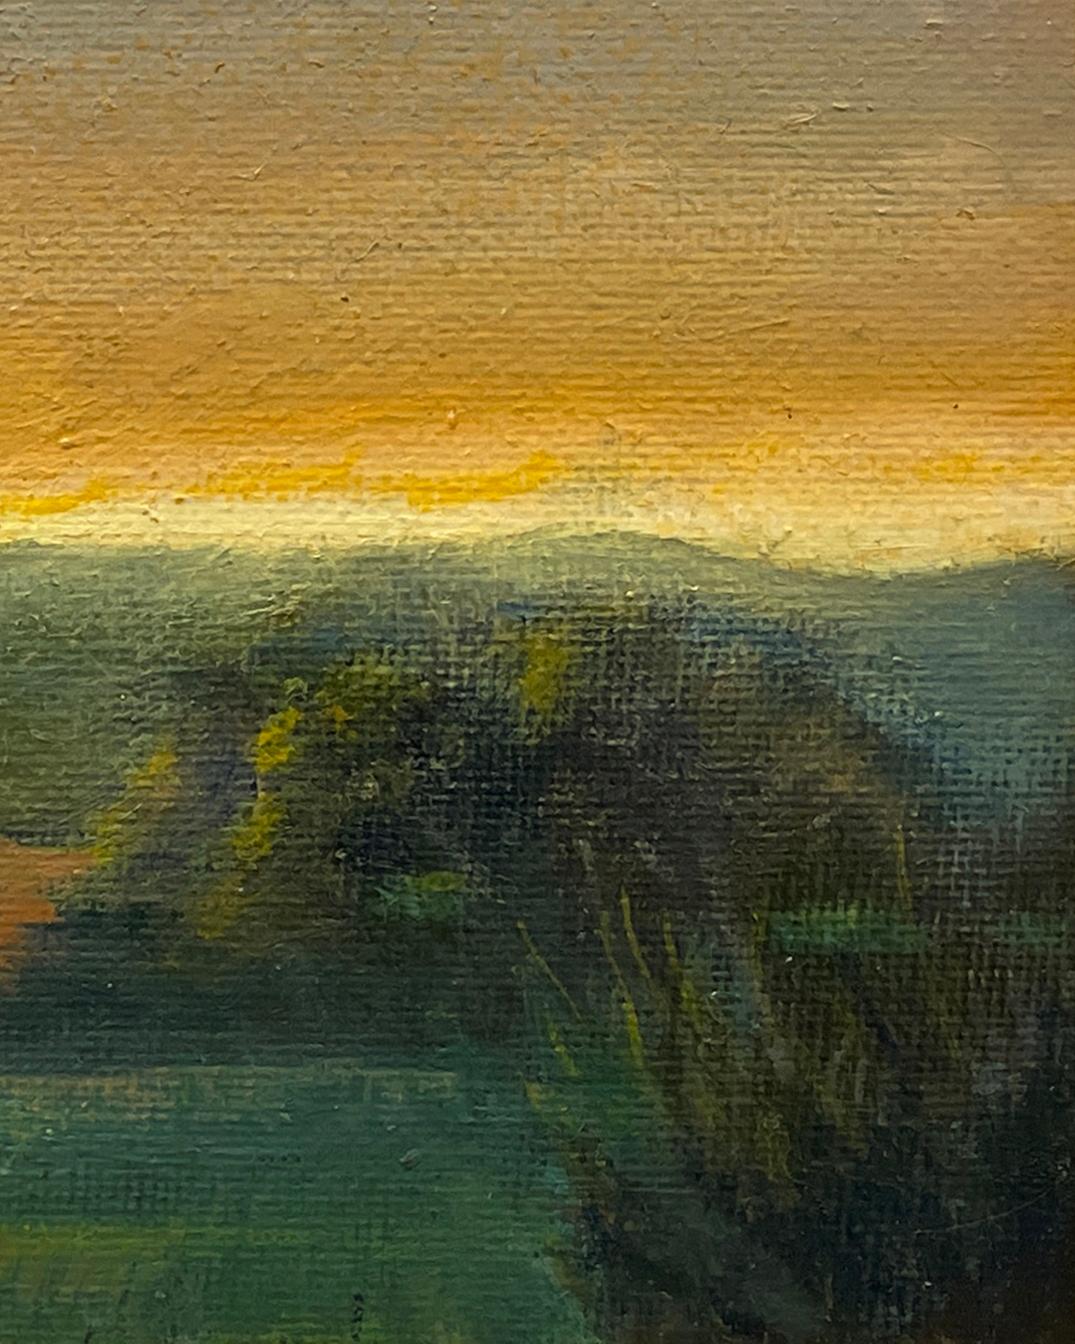 Soft Sky (Landscape Influenced by Hudson River School) by Judy Reynolds, 2023
5 x 7 inches, oil on canvas, gold frame, 6.5 x 8.5 inches framed
In a style reminiscent of the Hudson River School painters, Judy Reynolds realizes landscapes rife with